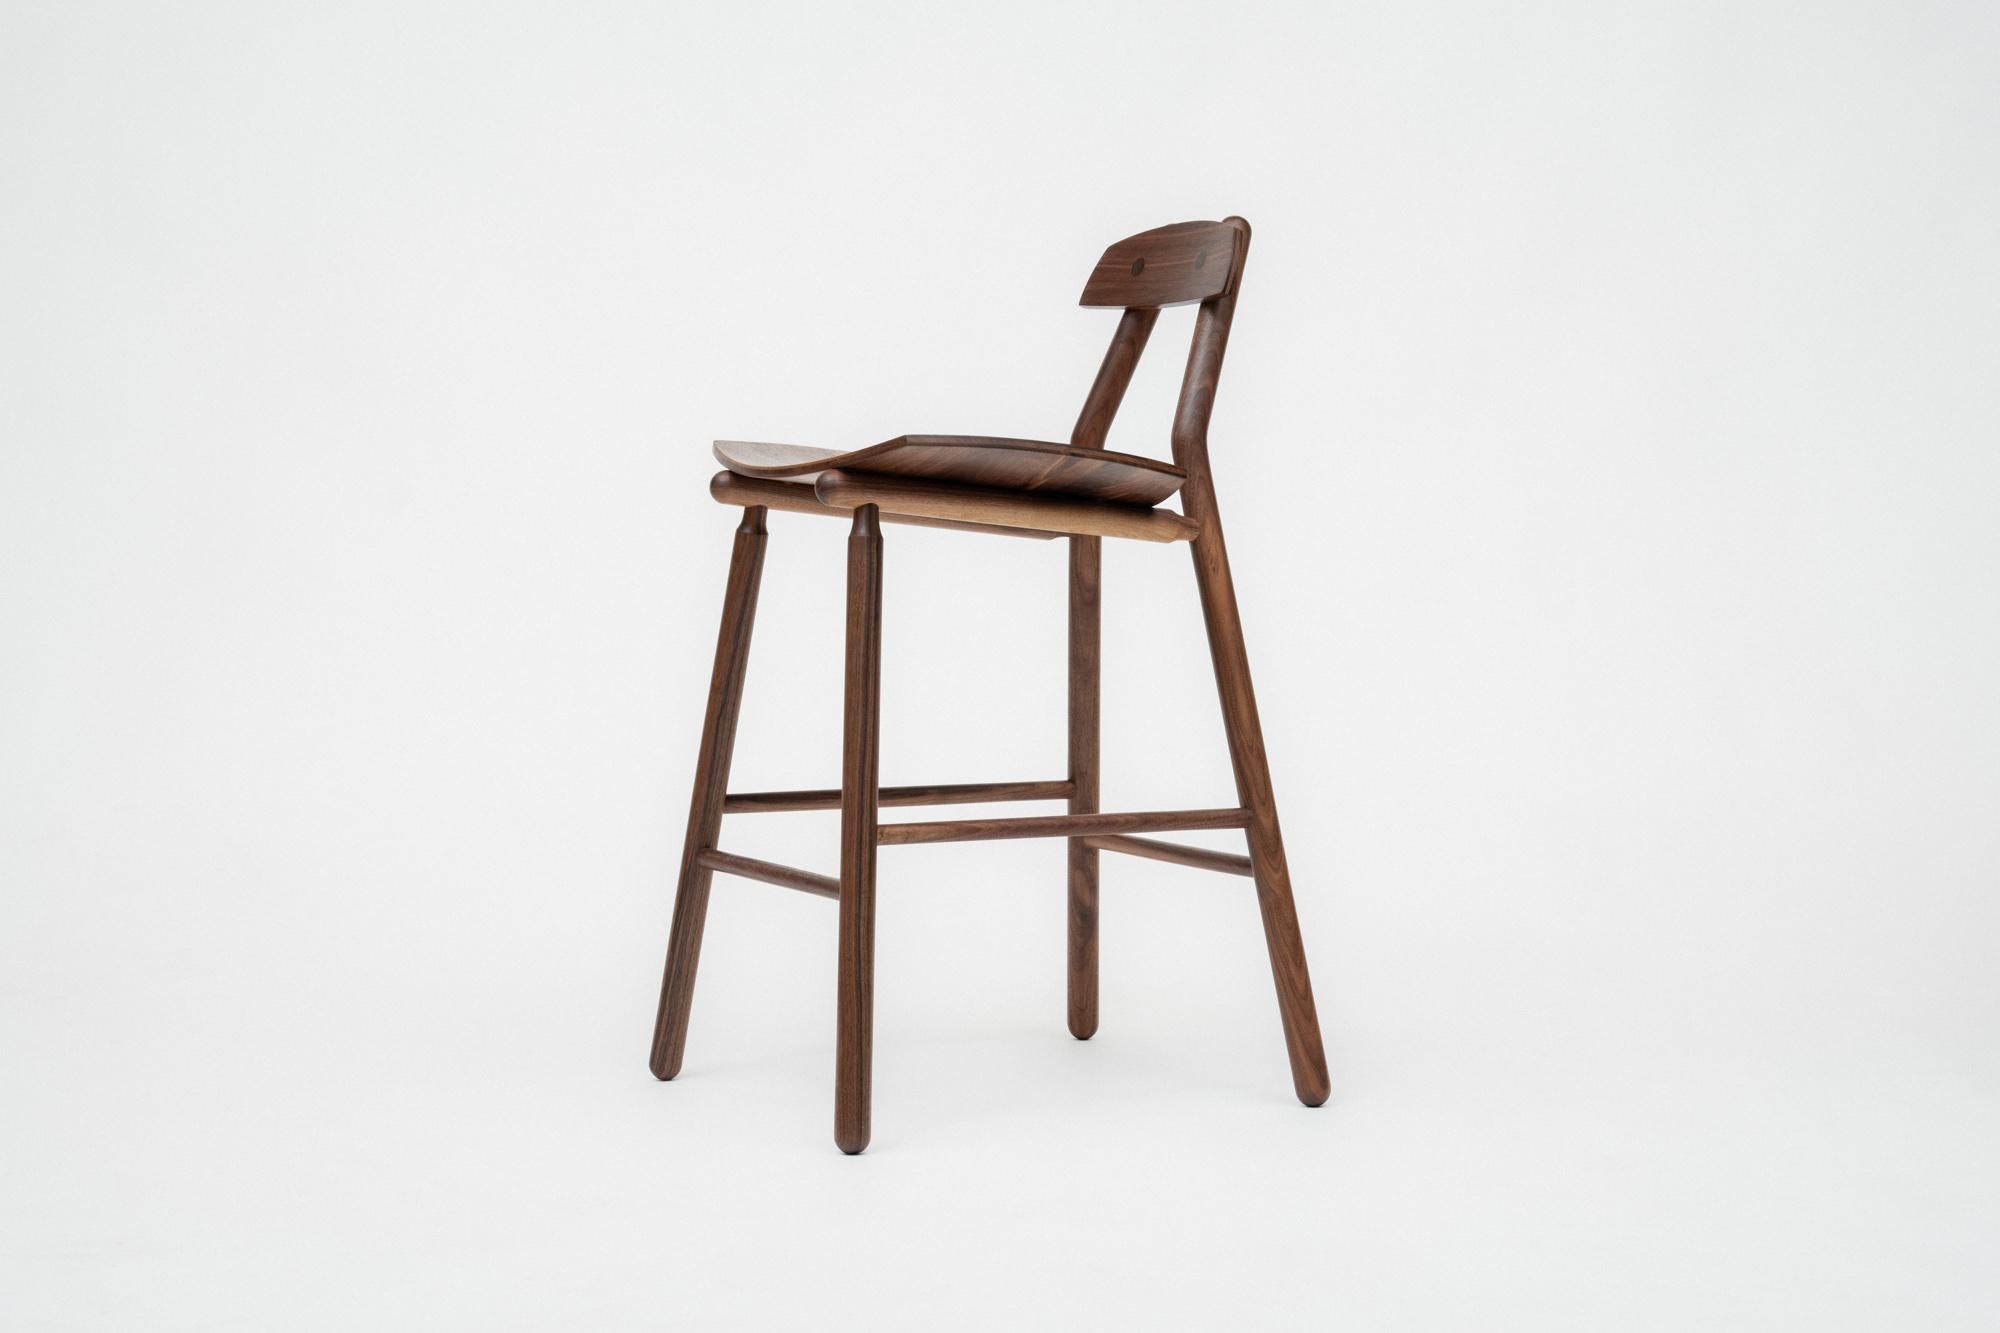 The Hiro Barstool is a contemporary, minimalist design made with traditional methods and solid wood joinery. The seat and back are fabricated from specially milled hardwood with a custom pressed curve that hugs the user. Its light and strong frame